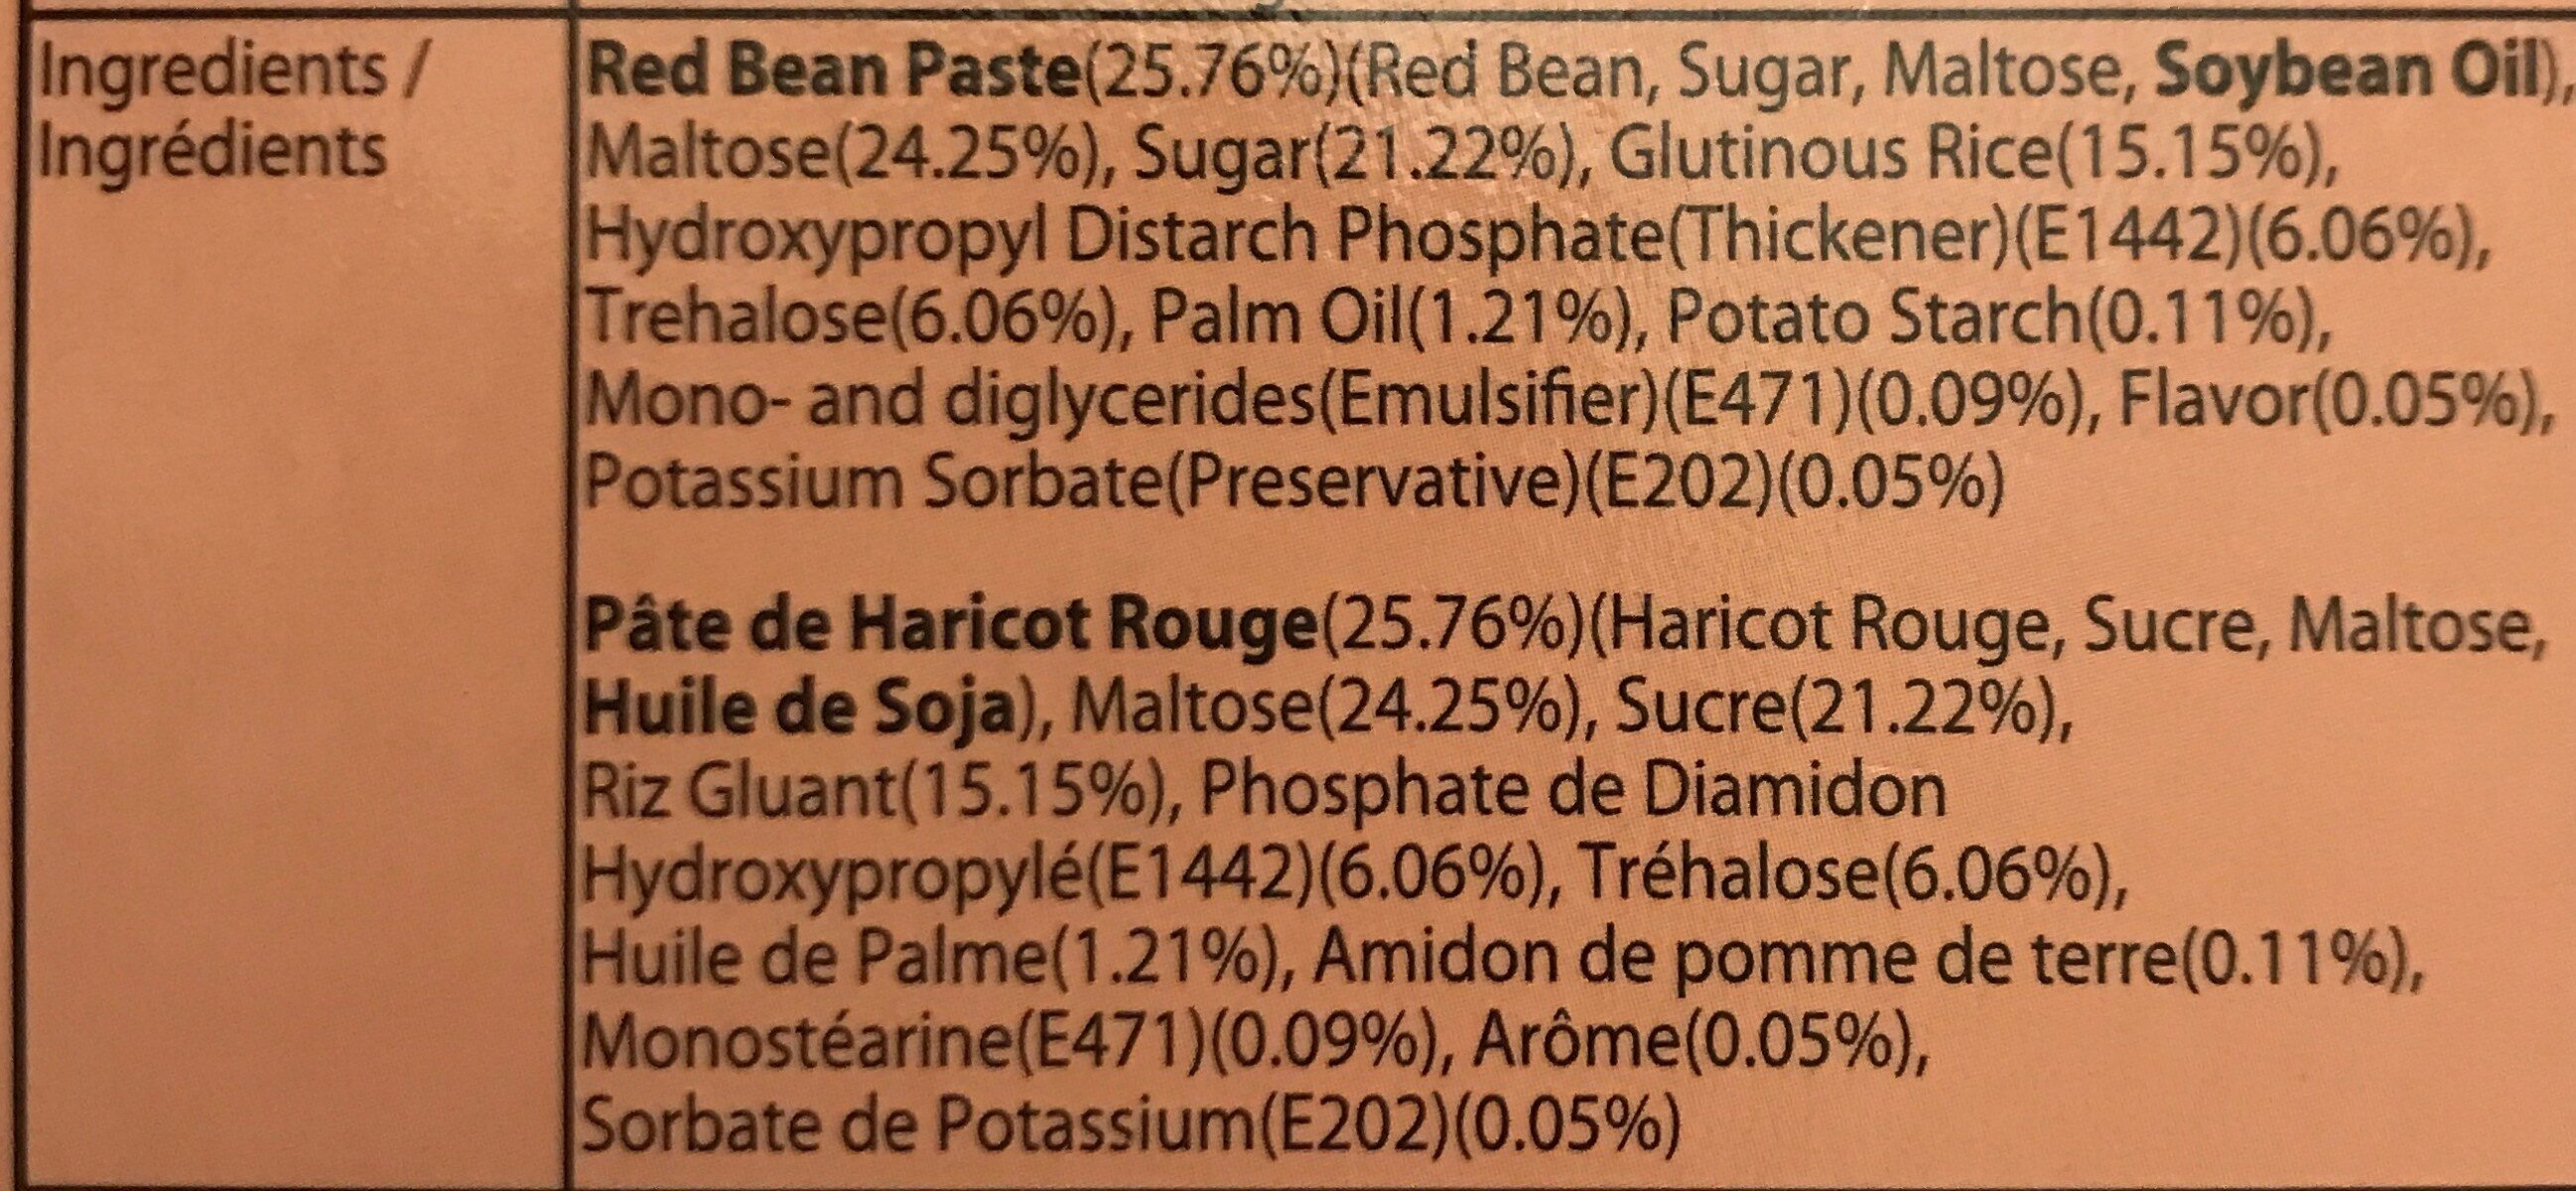 Mochi Haricot Rouge 210g - Nutrition facts